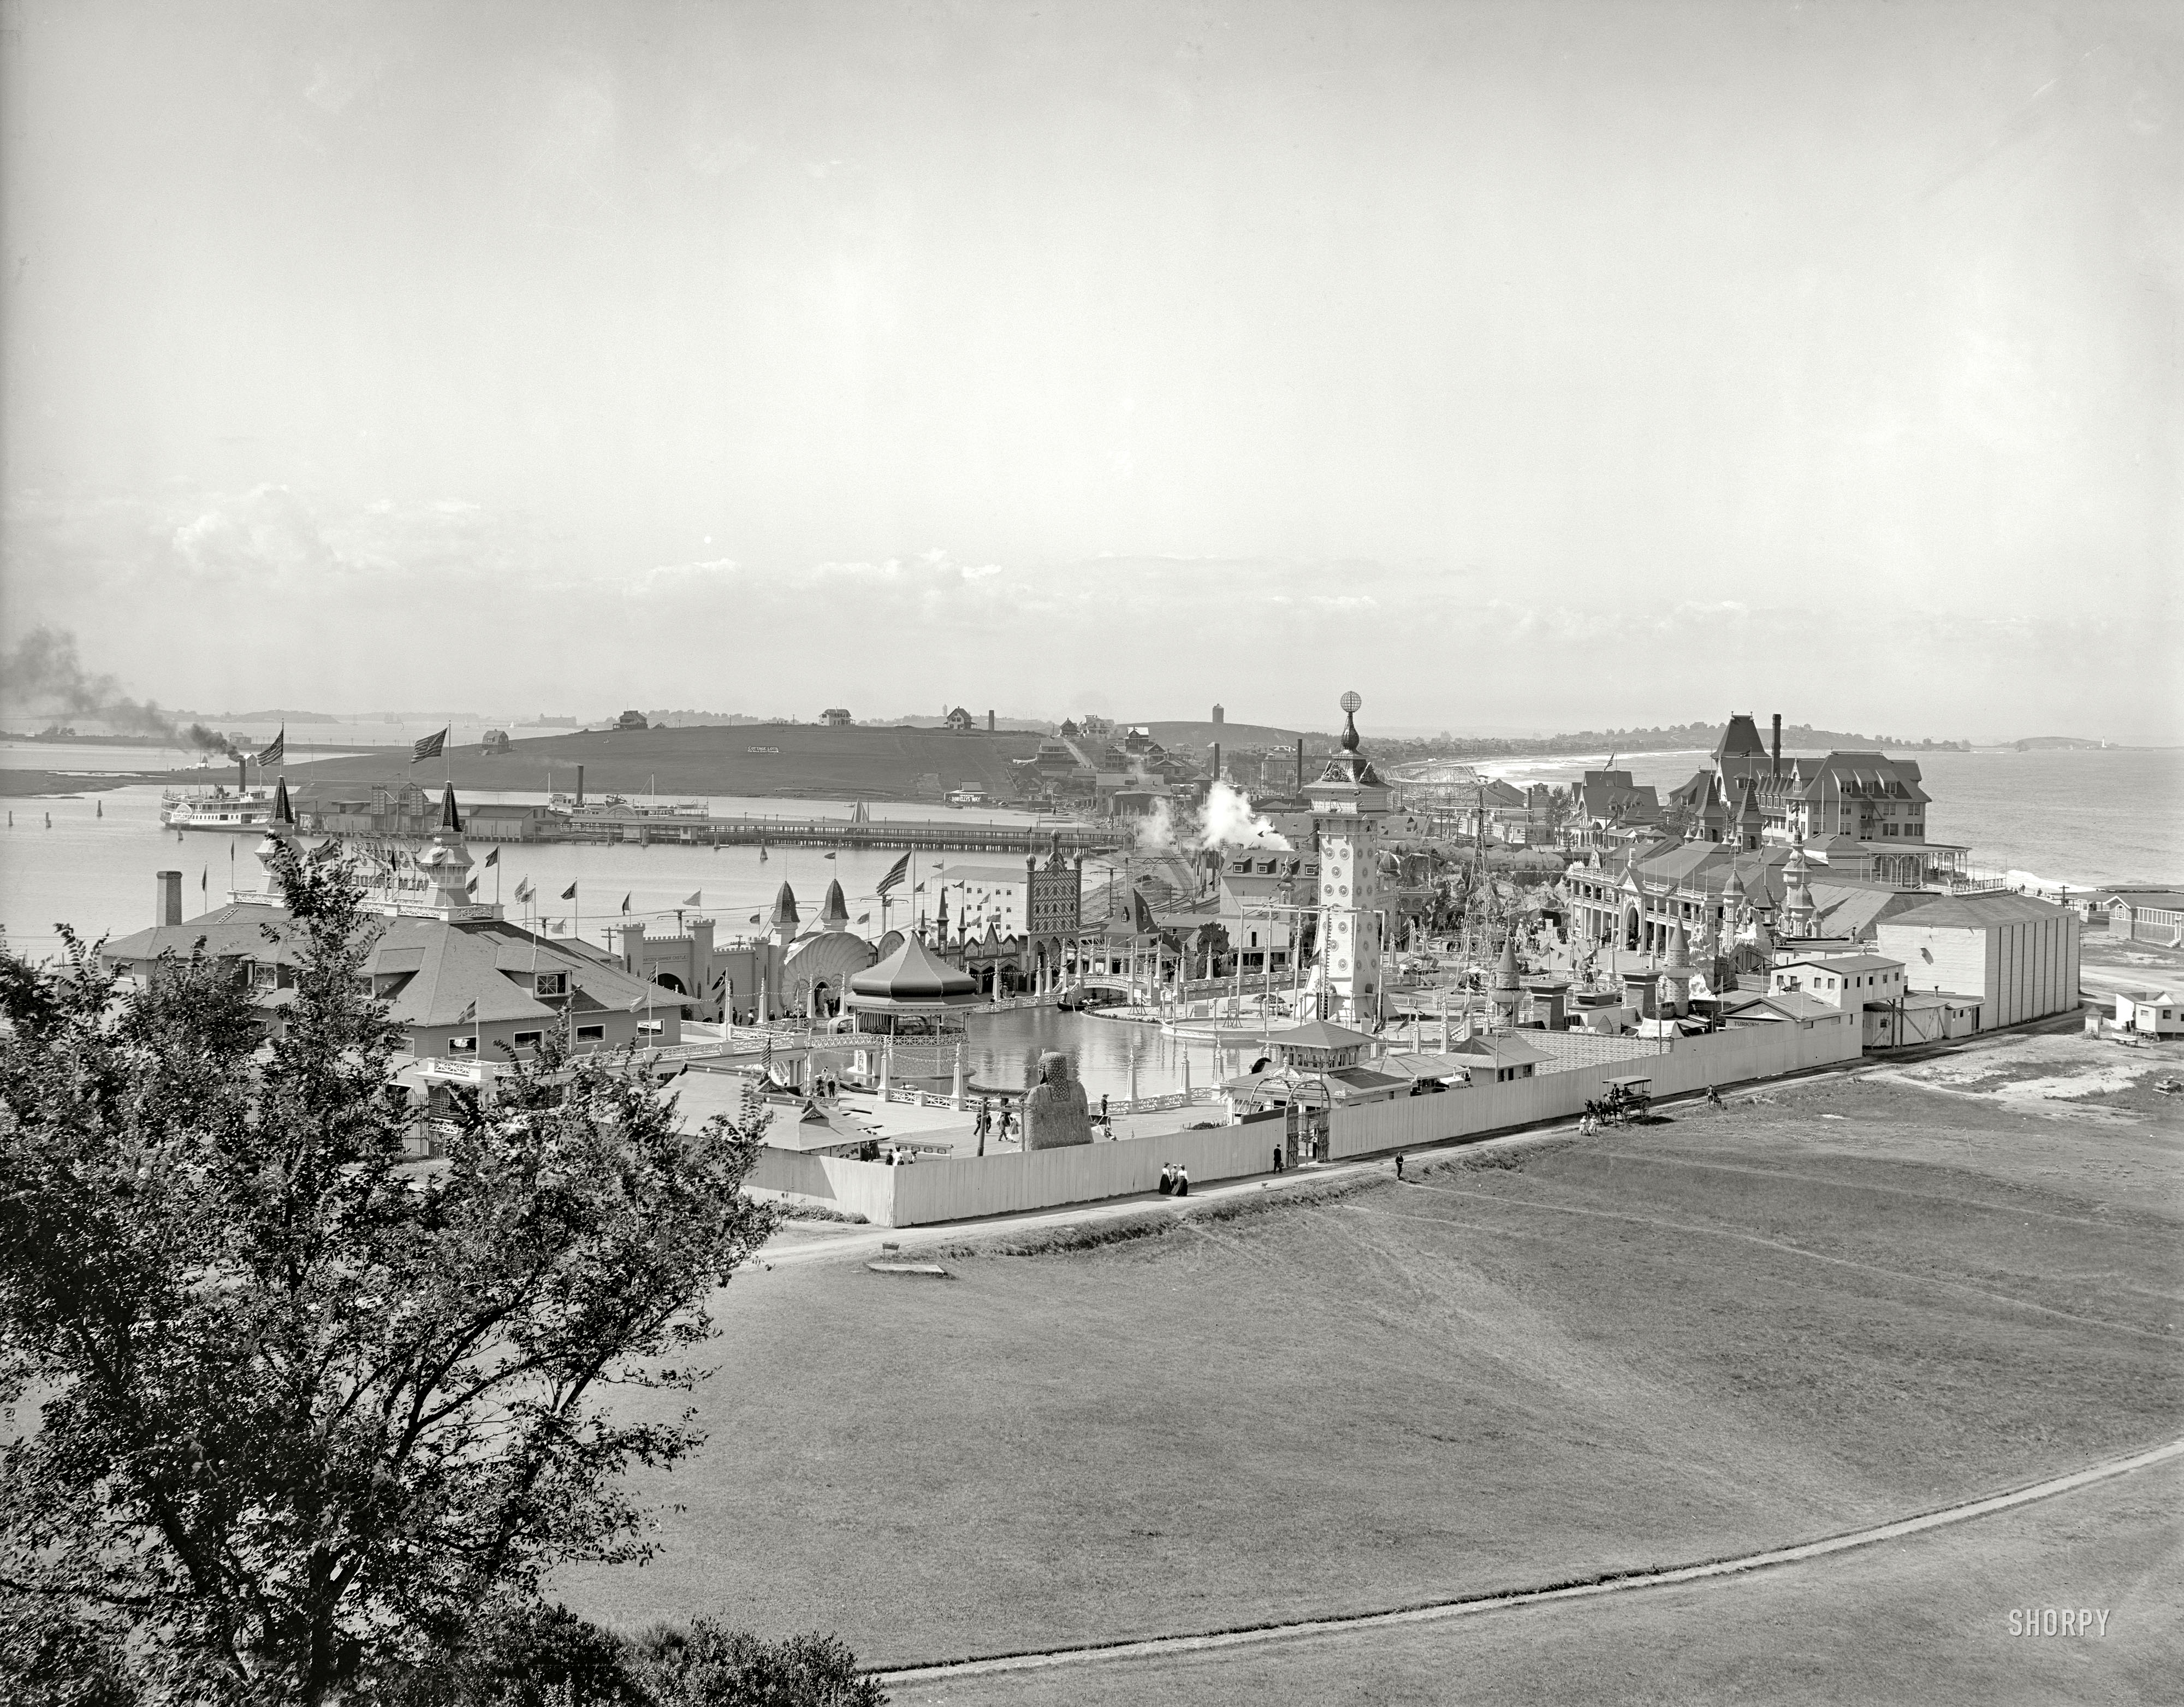 Nantasket Beach, Massachusetts, circa 1905. "Bird's eye view of Paragon Park from Rockland House." Note the Schlitz sign as well as the "Katzenjammer Castle." 8x10 inch dry plate glass negative, Detroit Publishing Co. View full size.